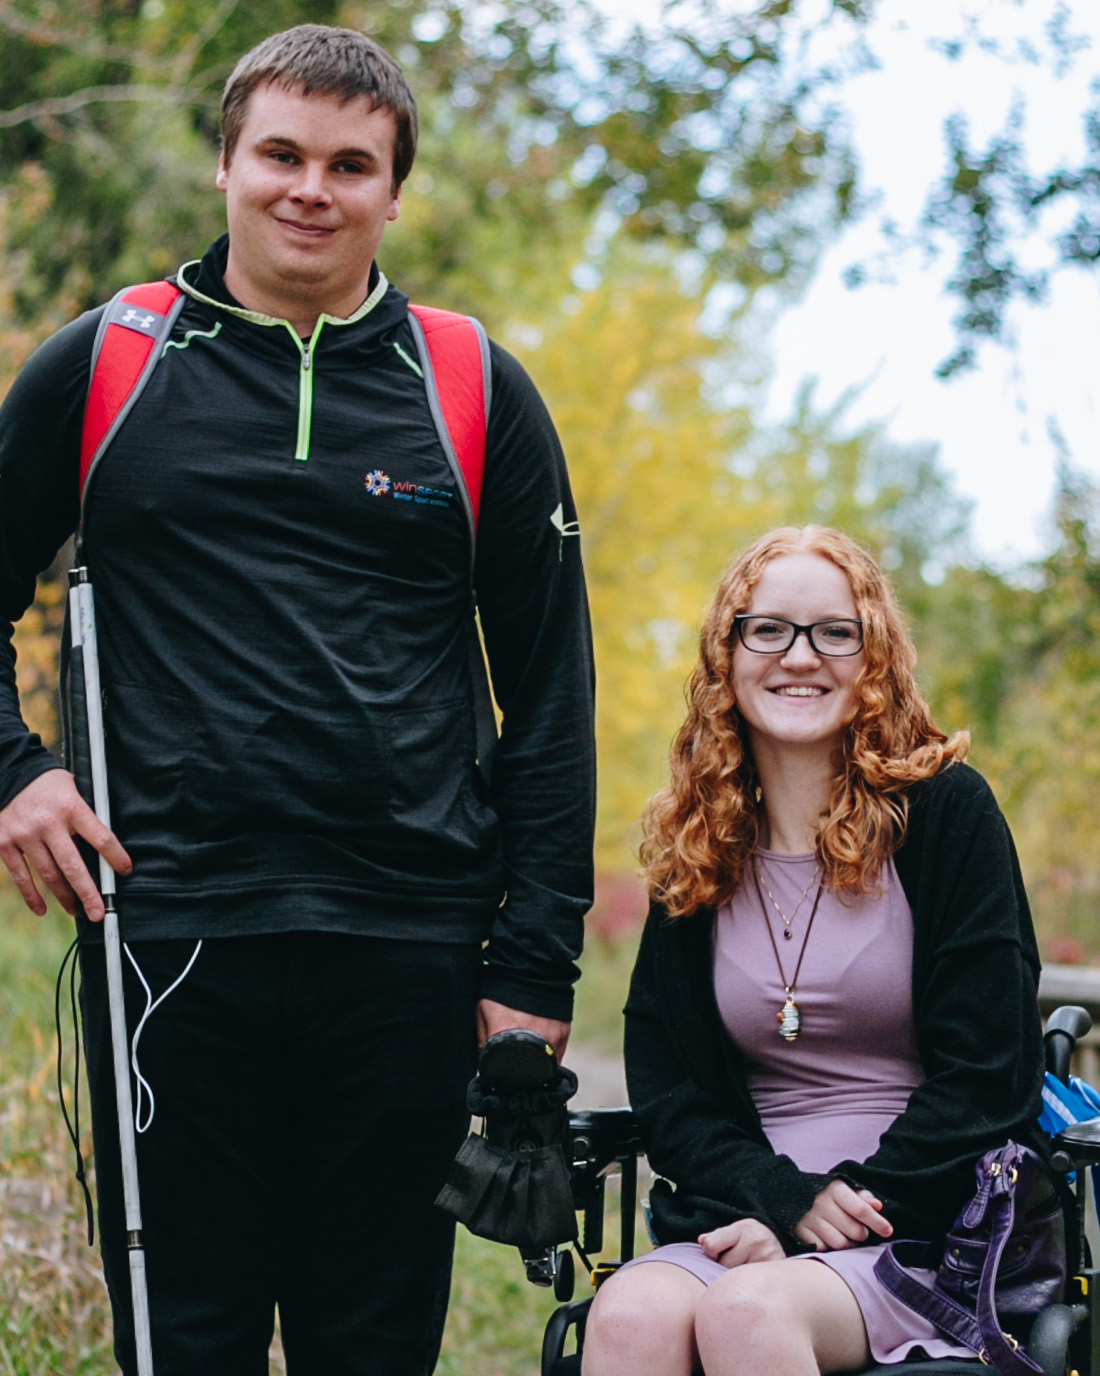 aaron, left, is smiling holding his walking cane, and alex, right, is smiling in her wheelchair